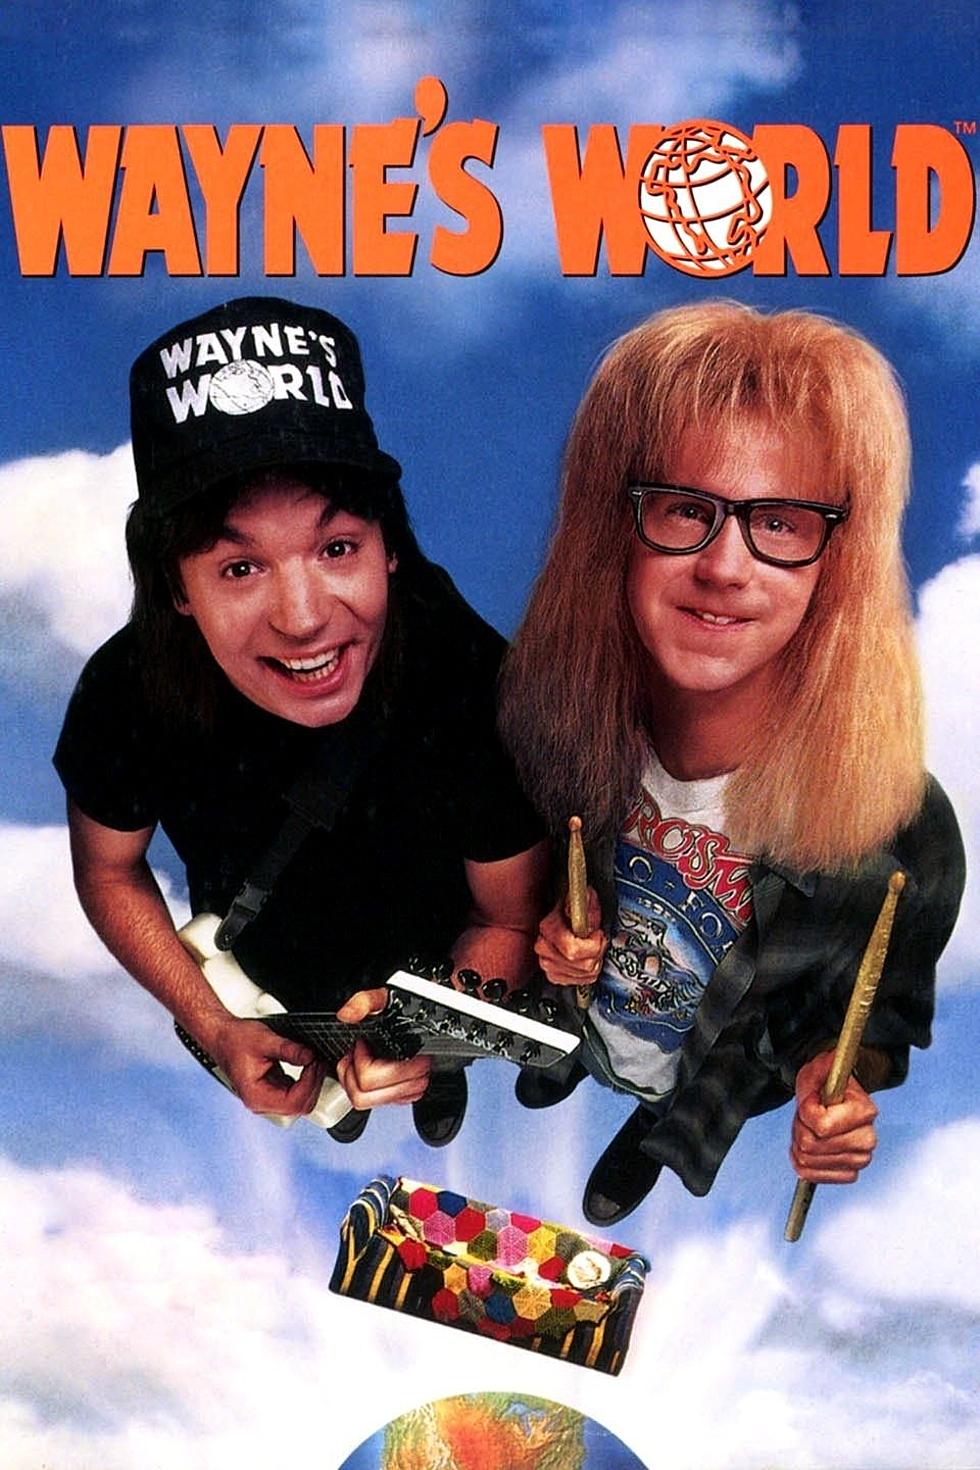 There’s a GoFundMe Page for Wayne’s World 3